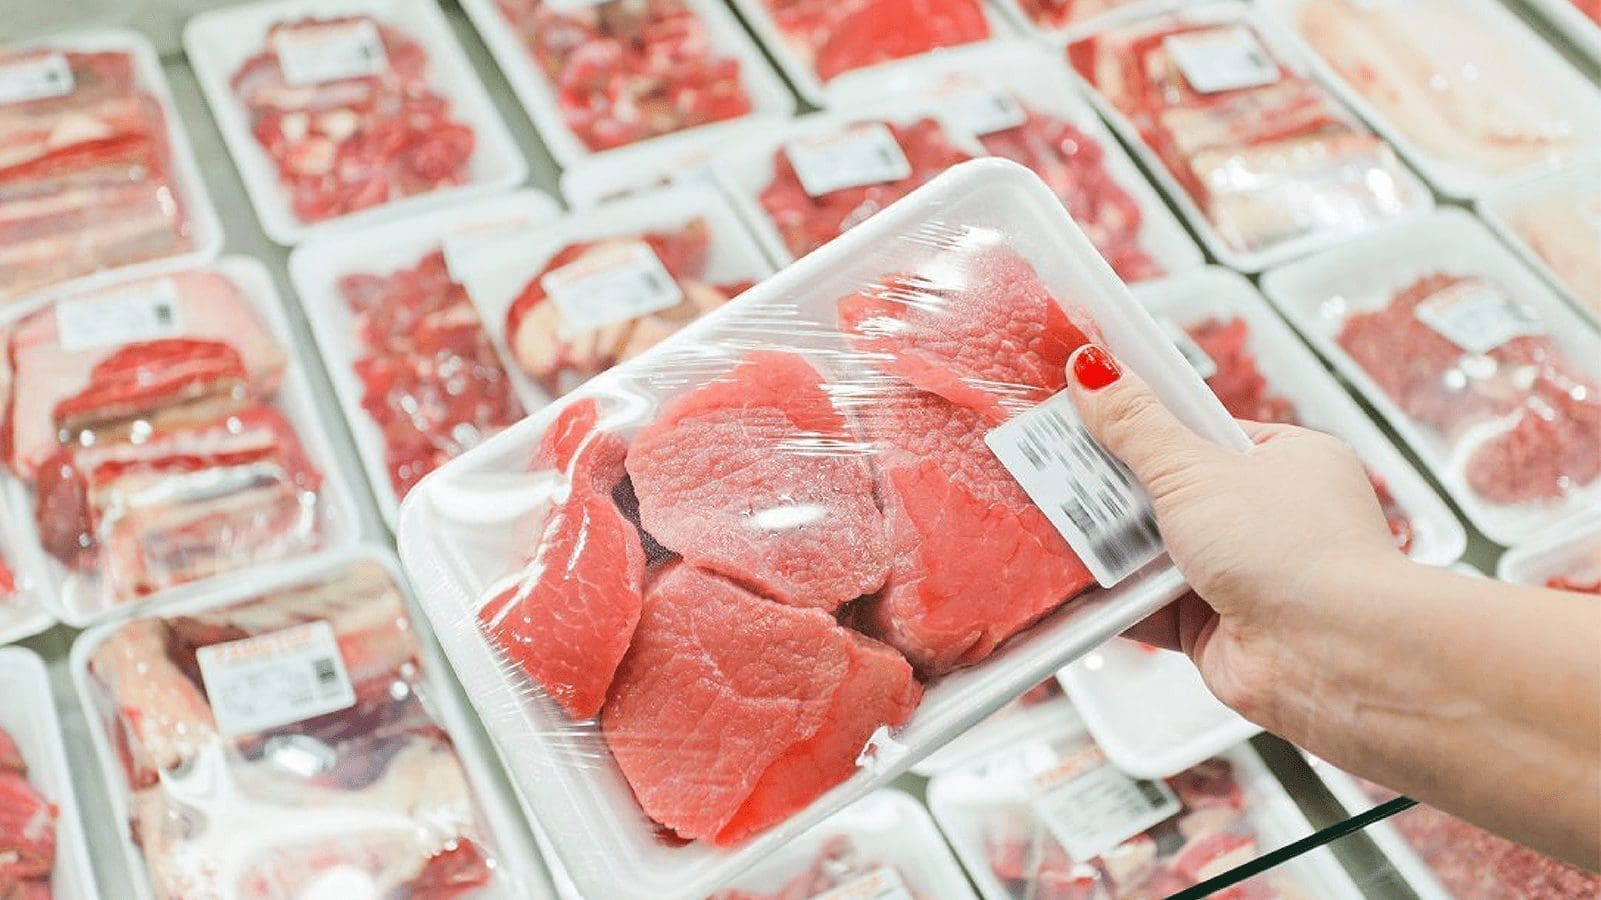 Raw pork and chicken meat sold in Kenyan supermarkets is contaminated: KEMRI research finds